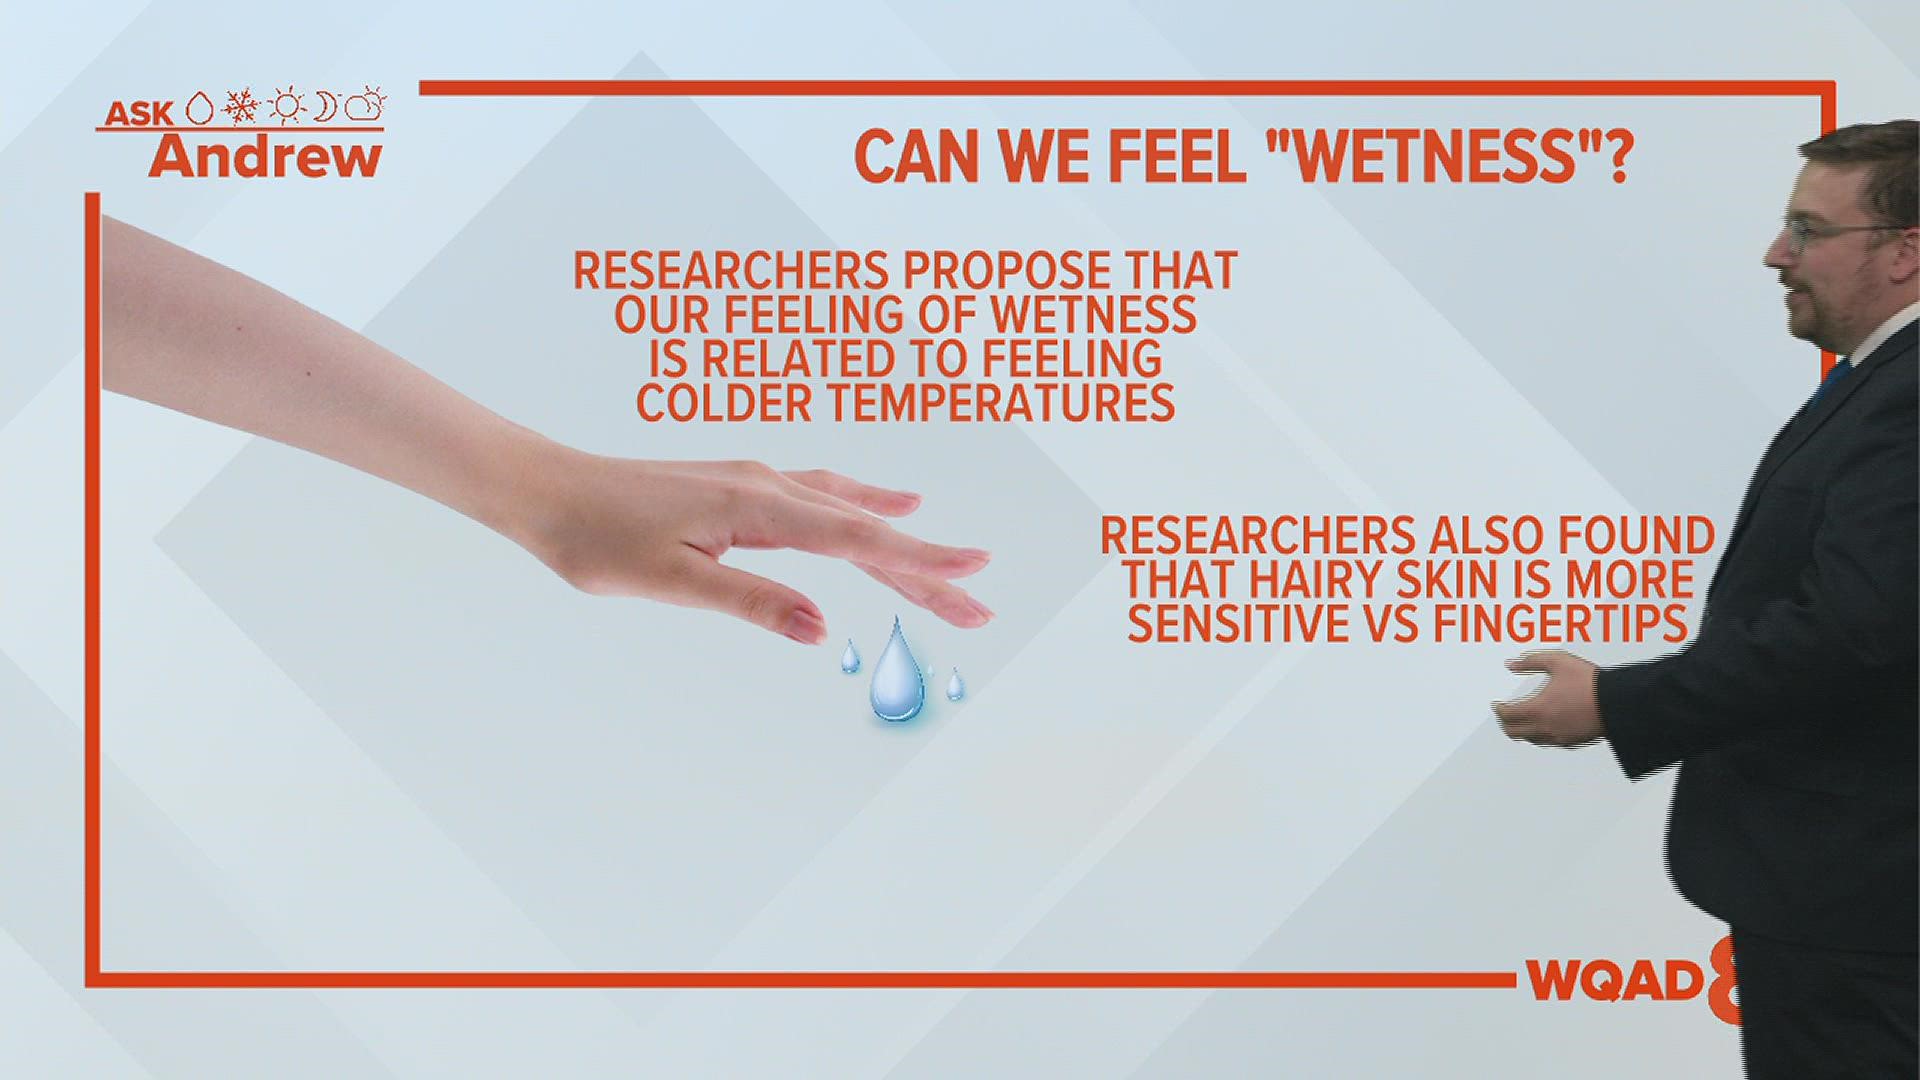 Researchers have found that our feeling of wetness has more to do with the temperature of what we are touching.